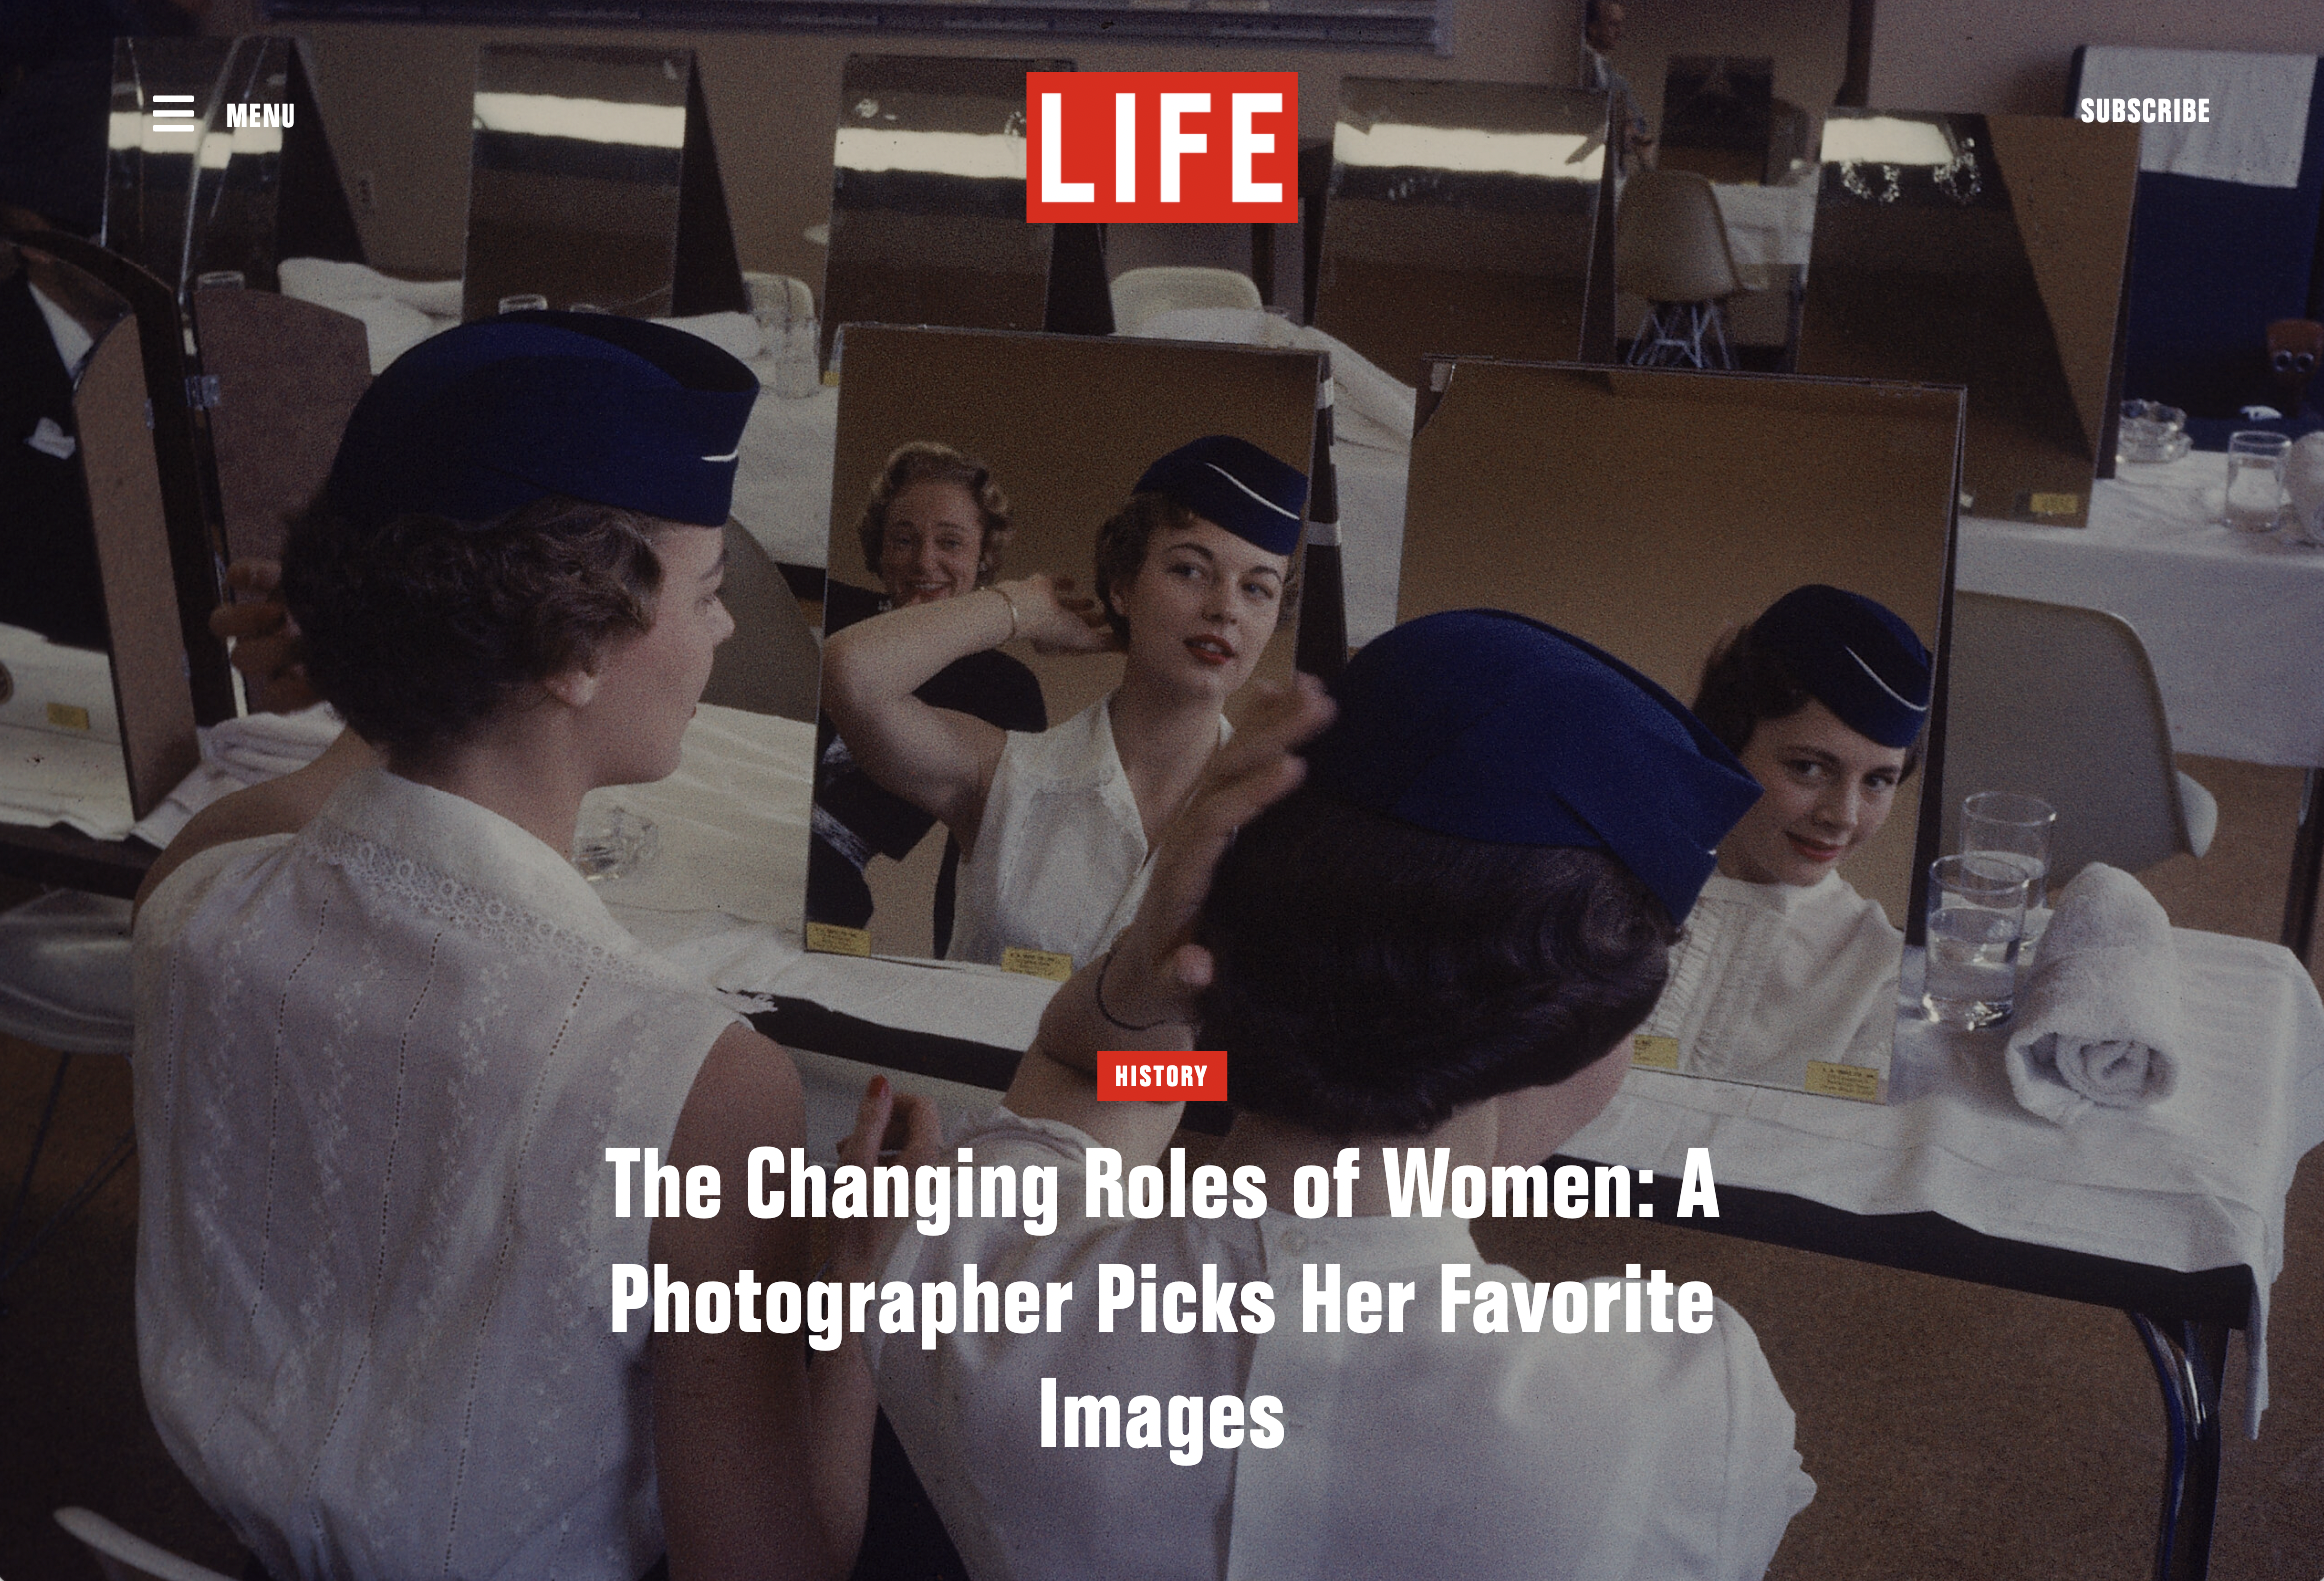 For LIFE: The Changing Roles of Women: A Photographer Picks Her Favorite Images